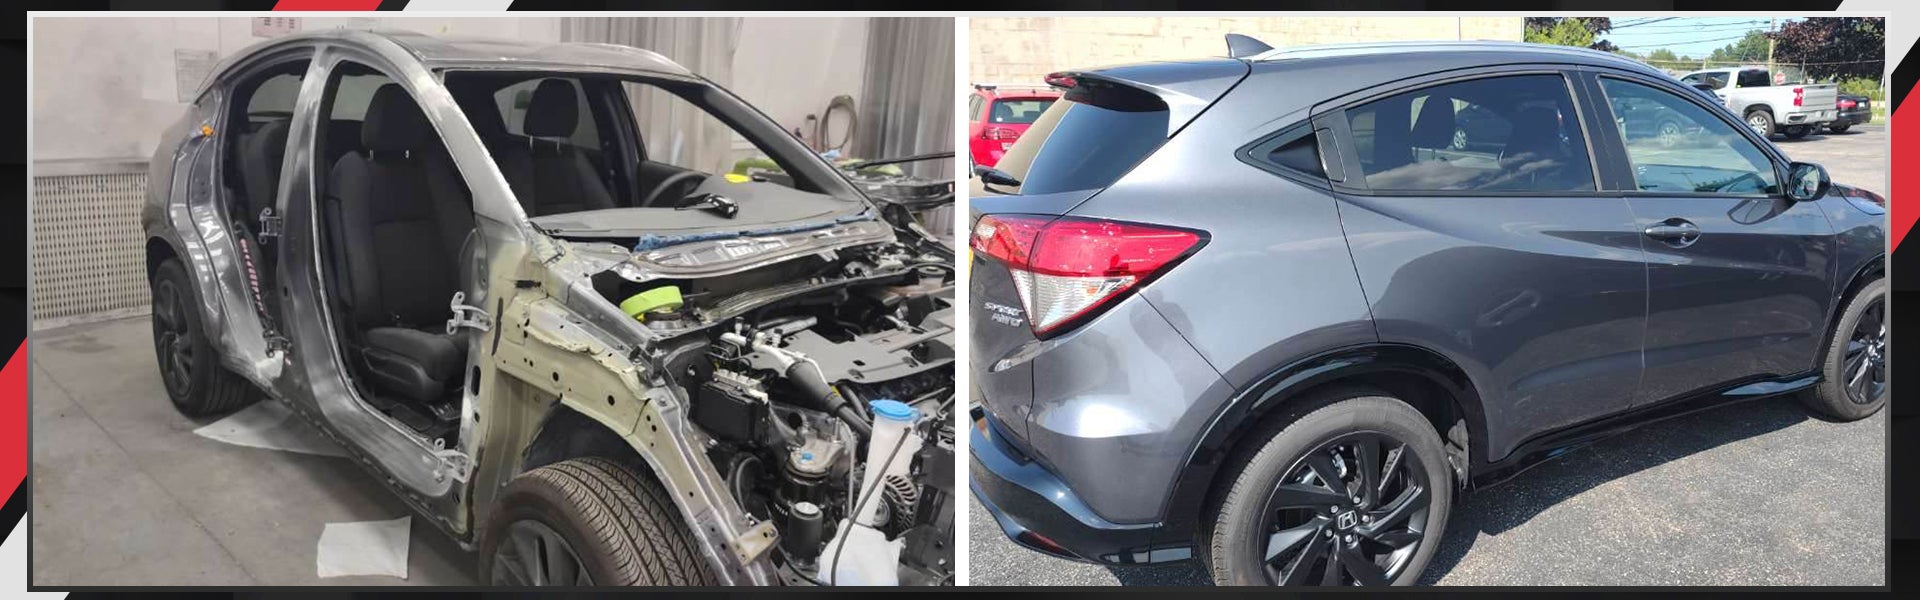 auto body repair before and after